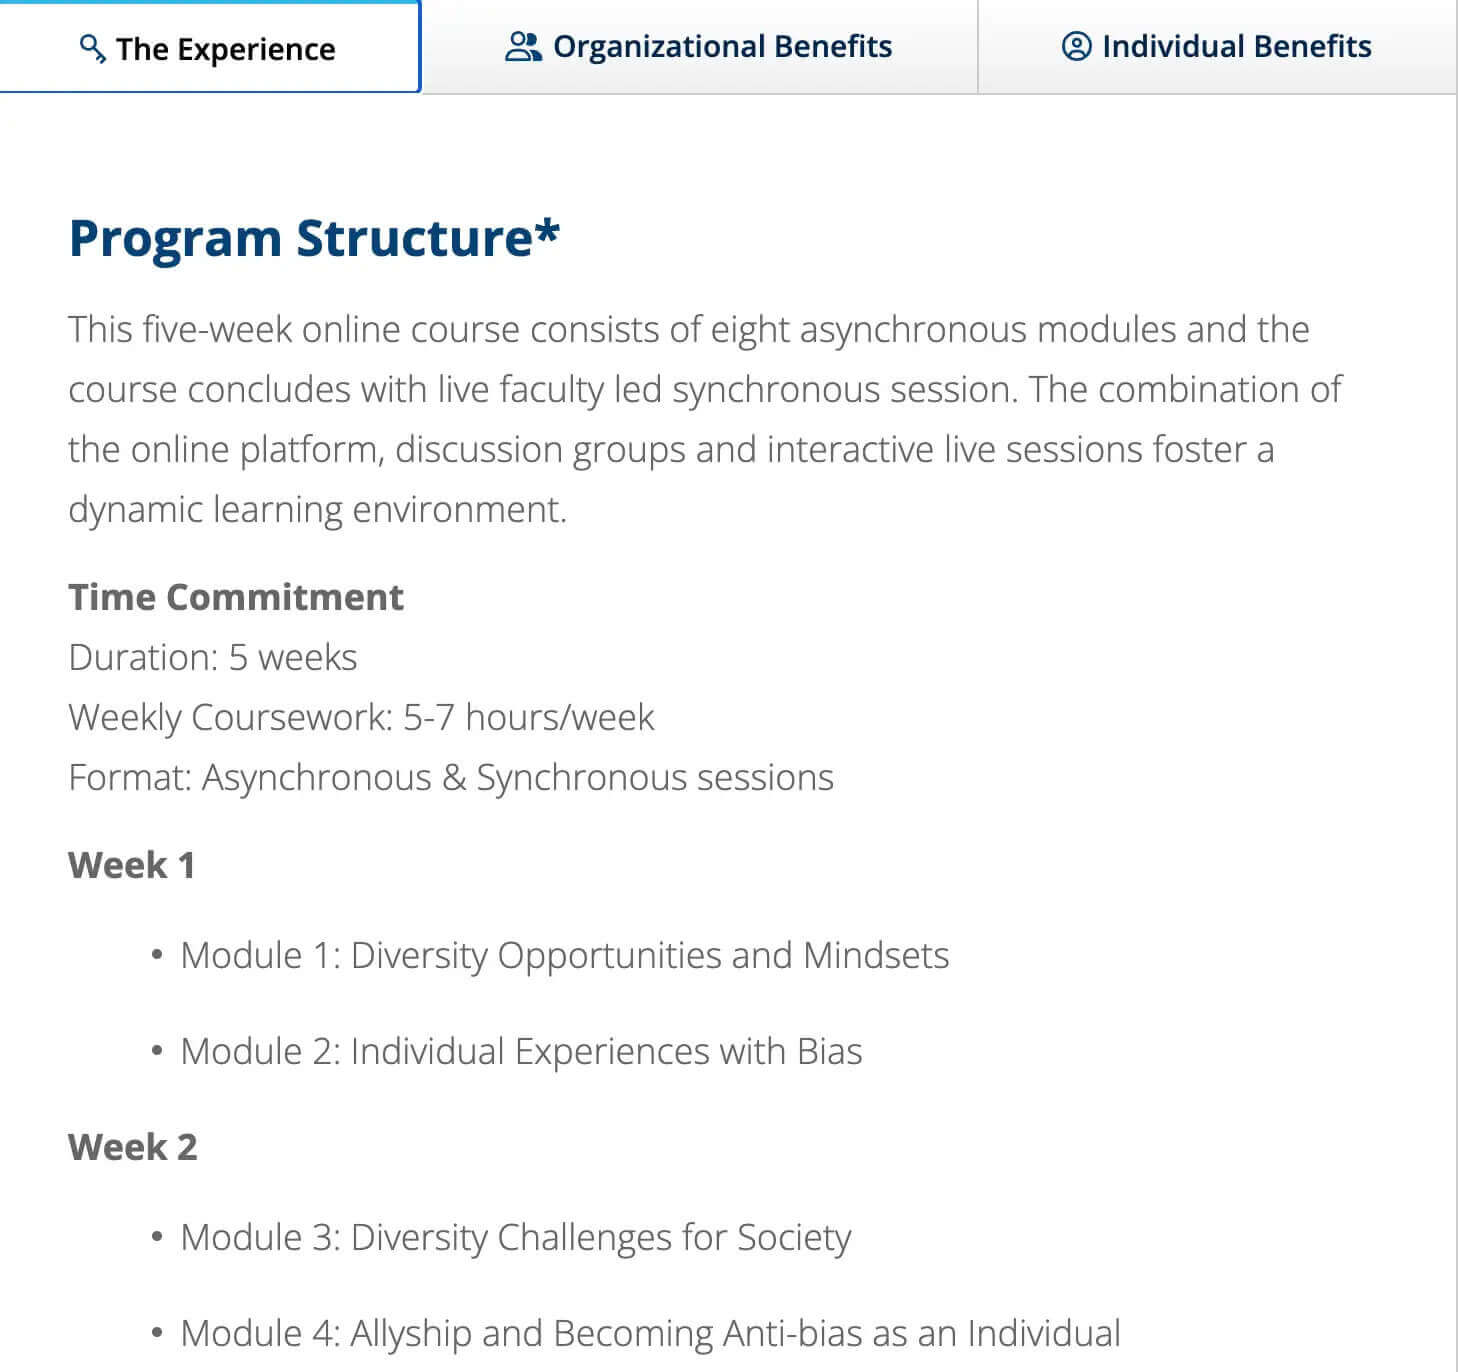 Leading Inclusive and Diverse Teams and Organizations course outline by University of Michigan is another example of a DEI Training program.